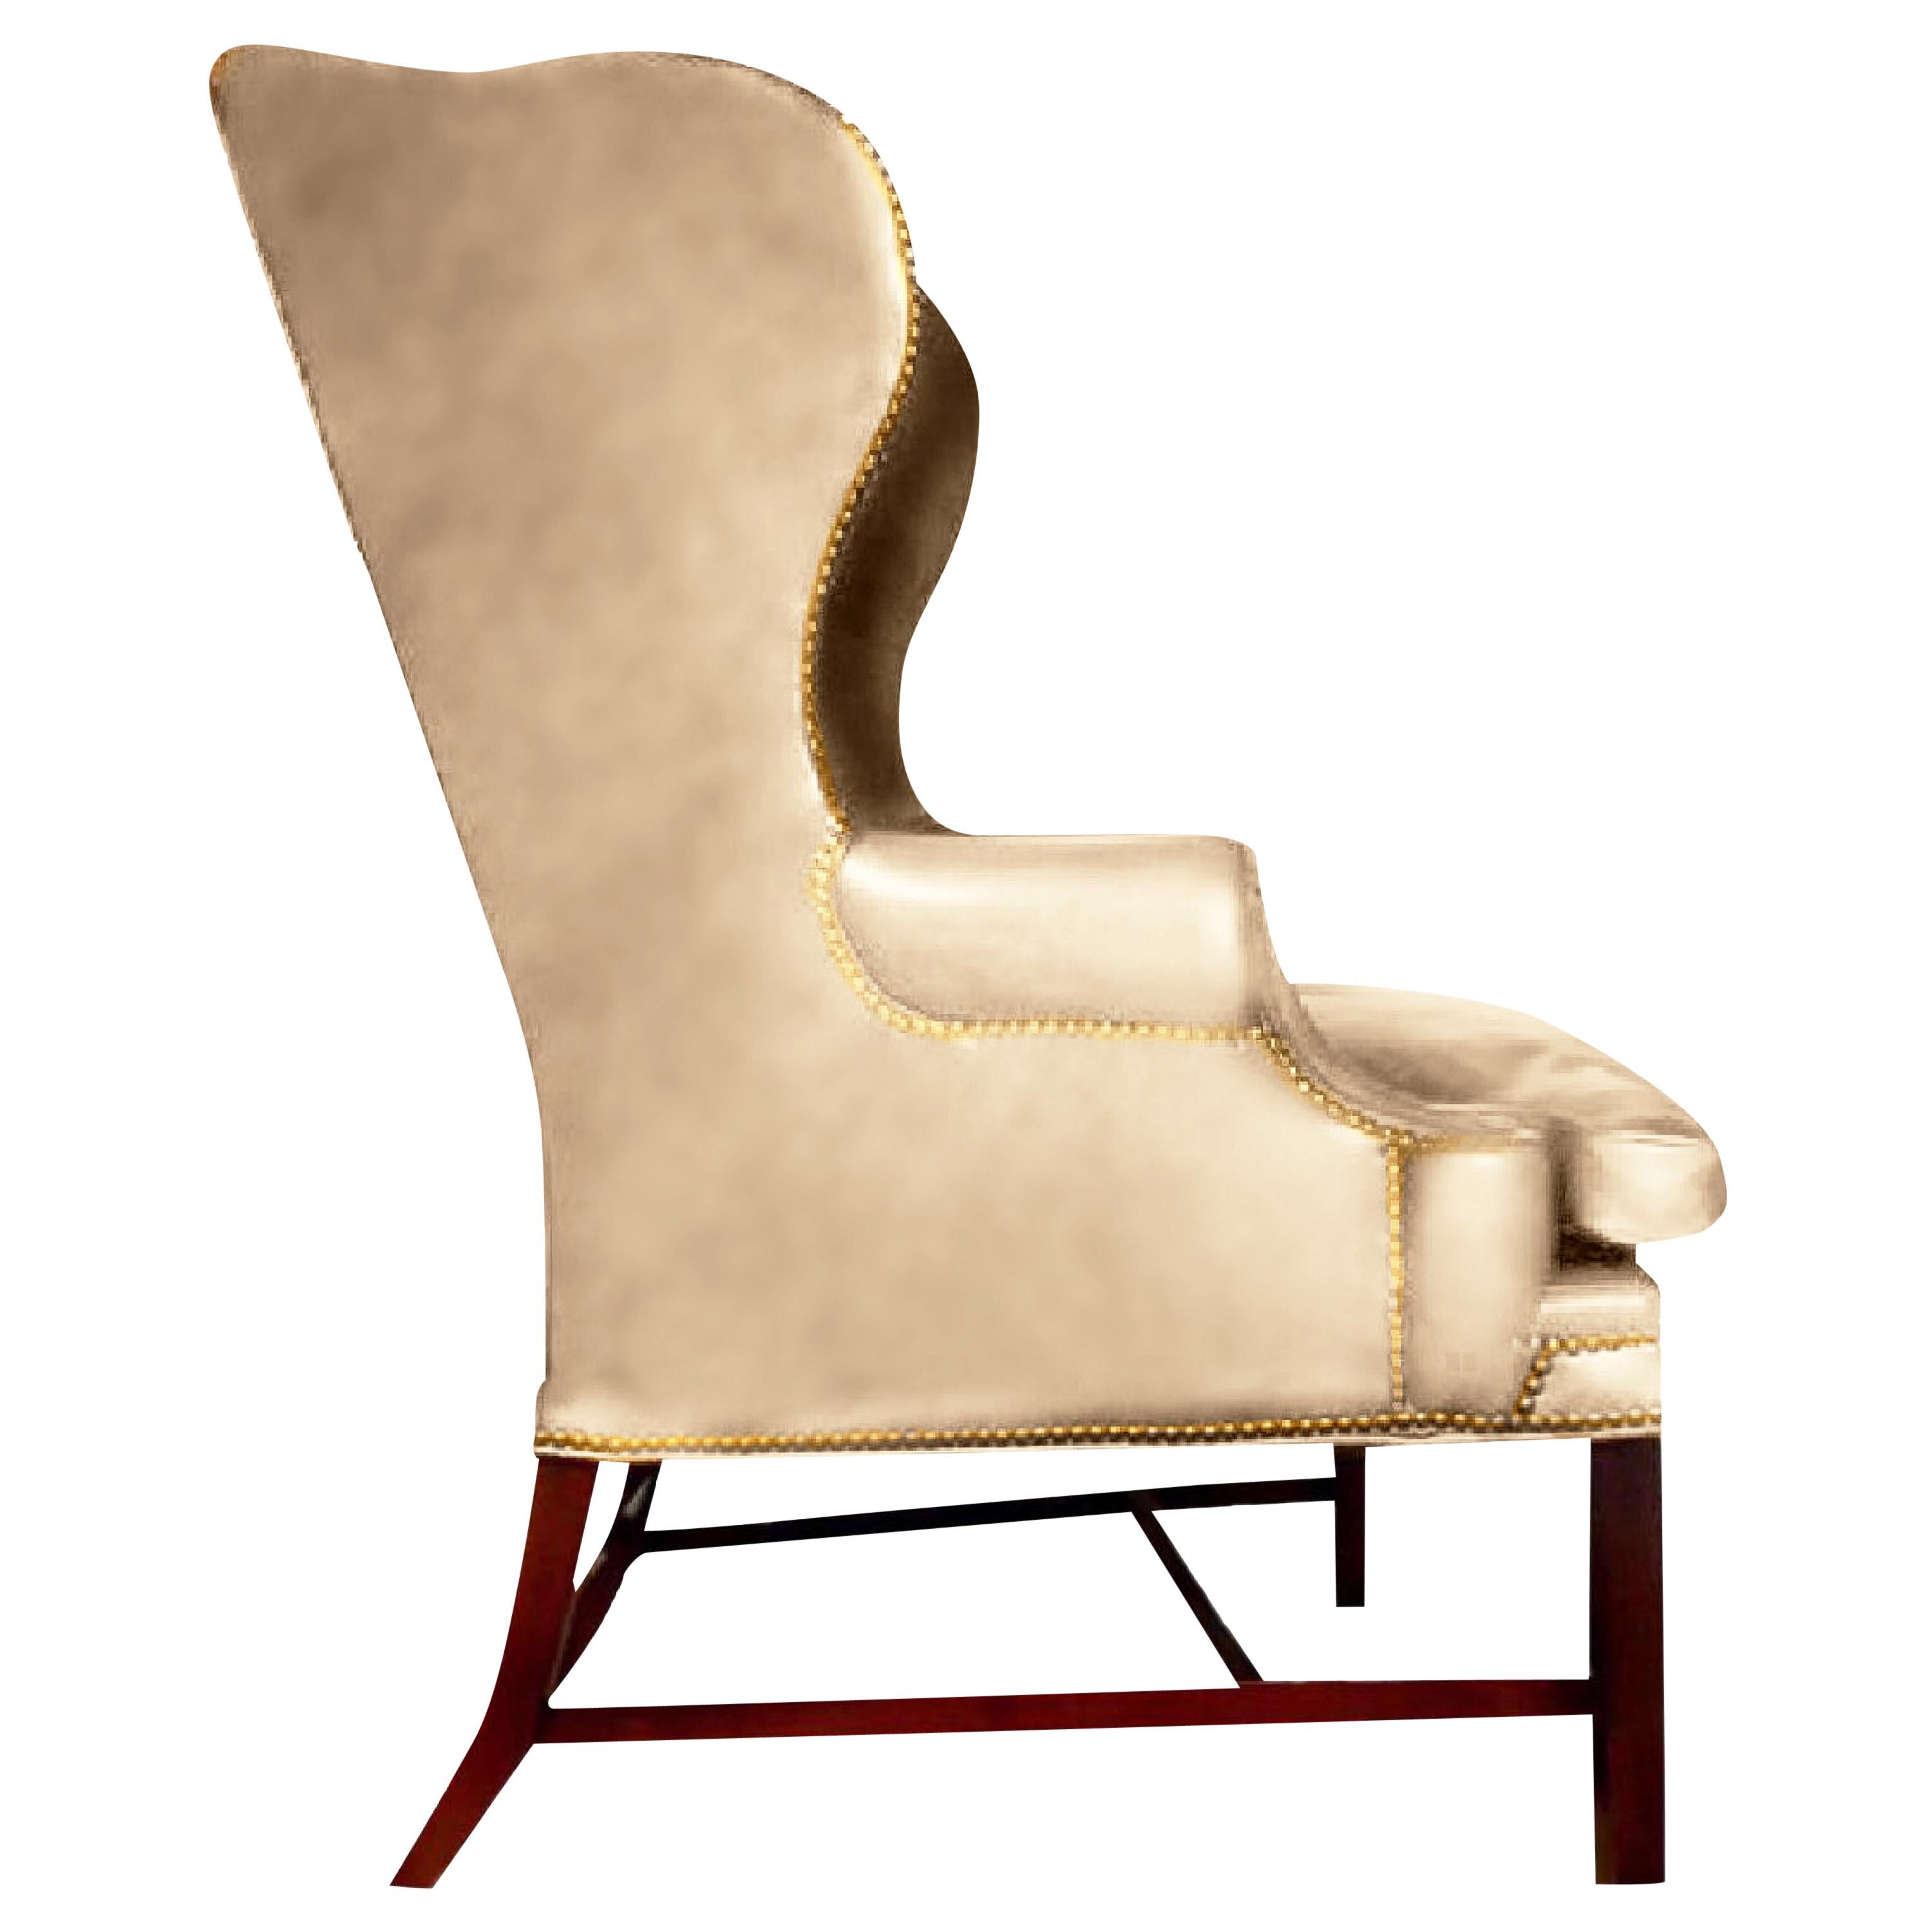 Glorious and aged to perfection, the early Ralph Lauren wingback chair is the epitome of grounded, American luxury, as inviting, enveloping, unforced and timeless as it is luxurious, meticulously handcrafted and sculptural.
Rare custom buff natural